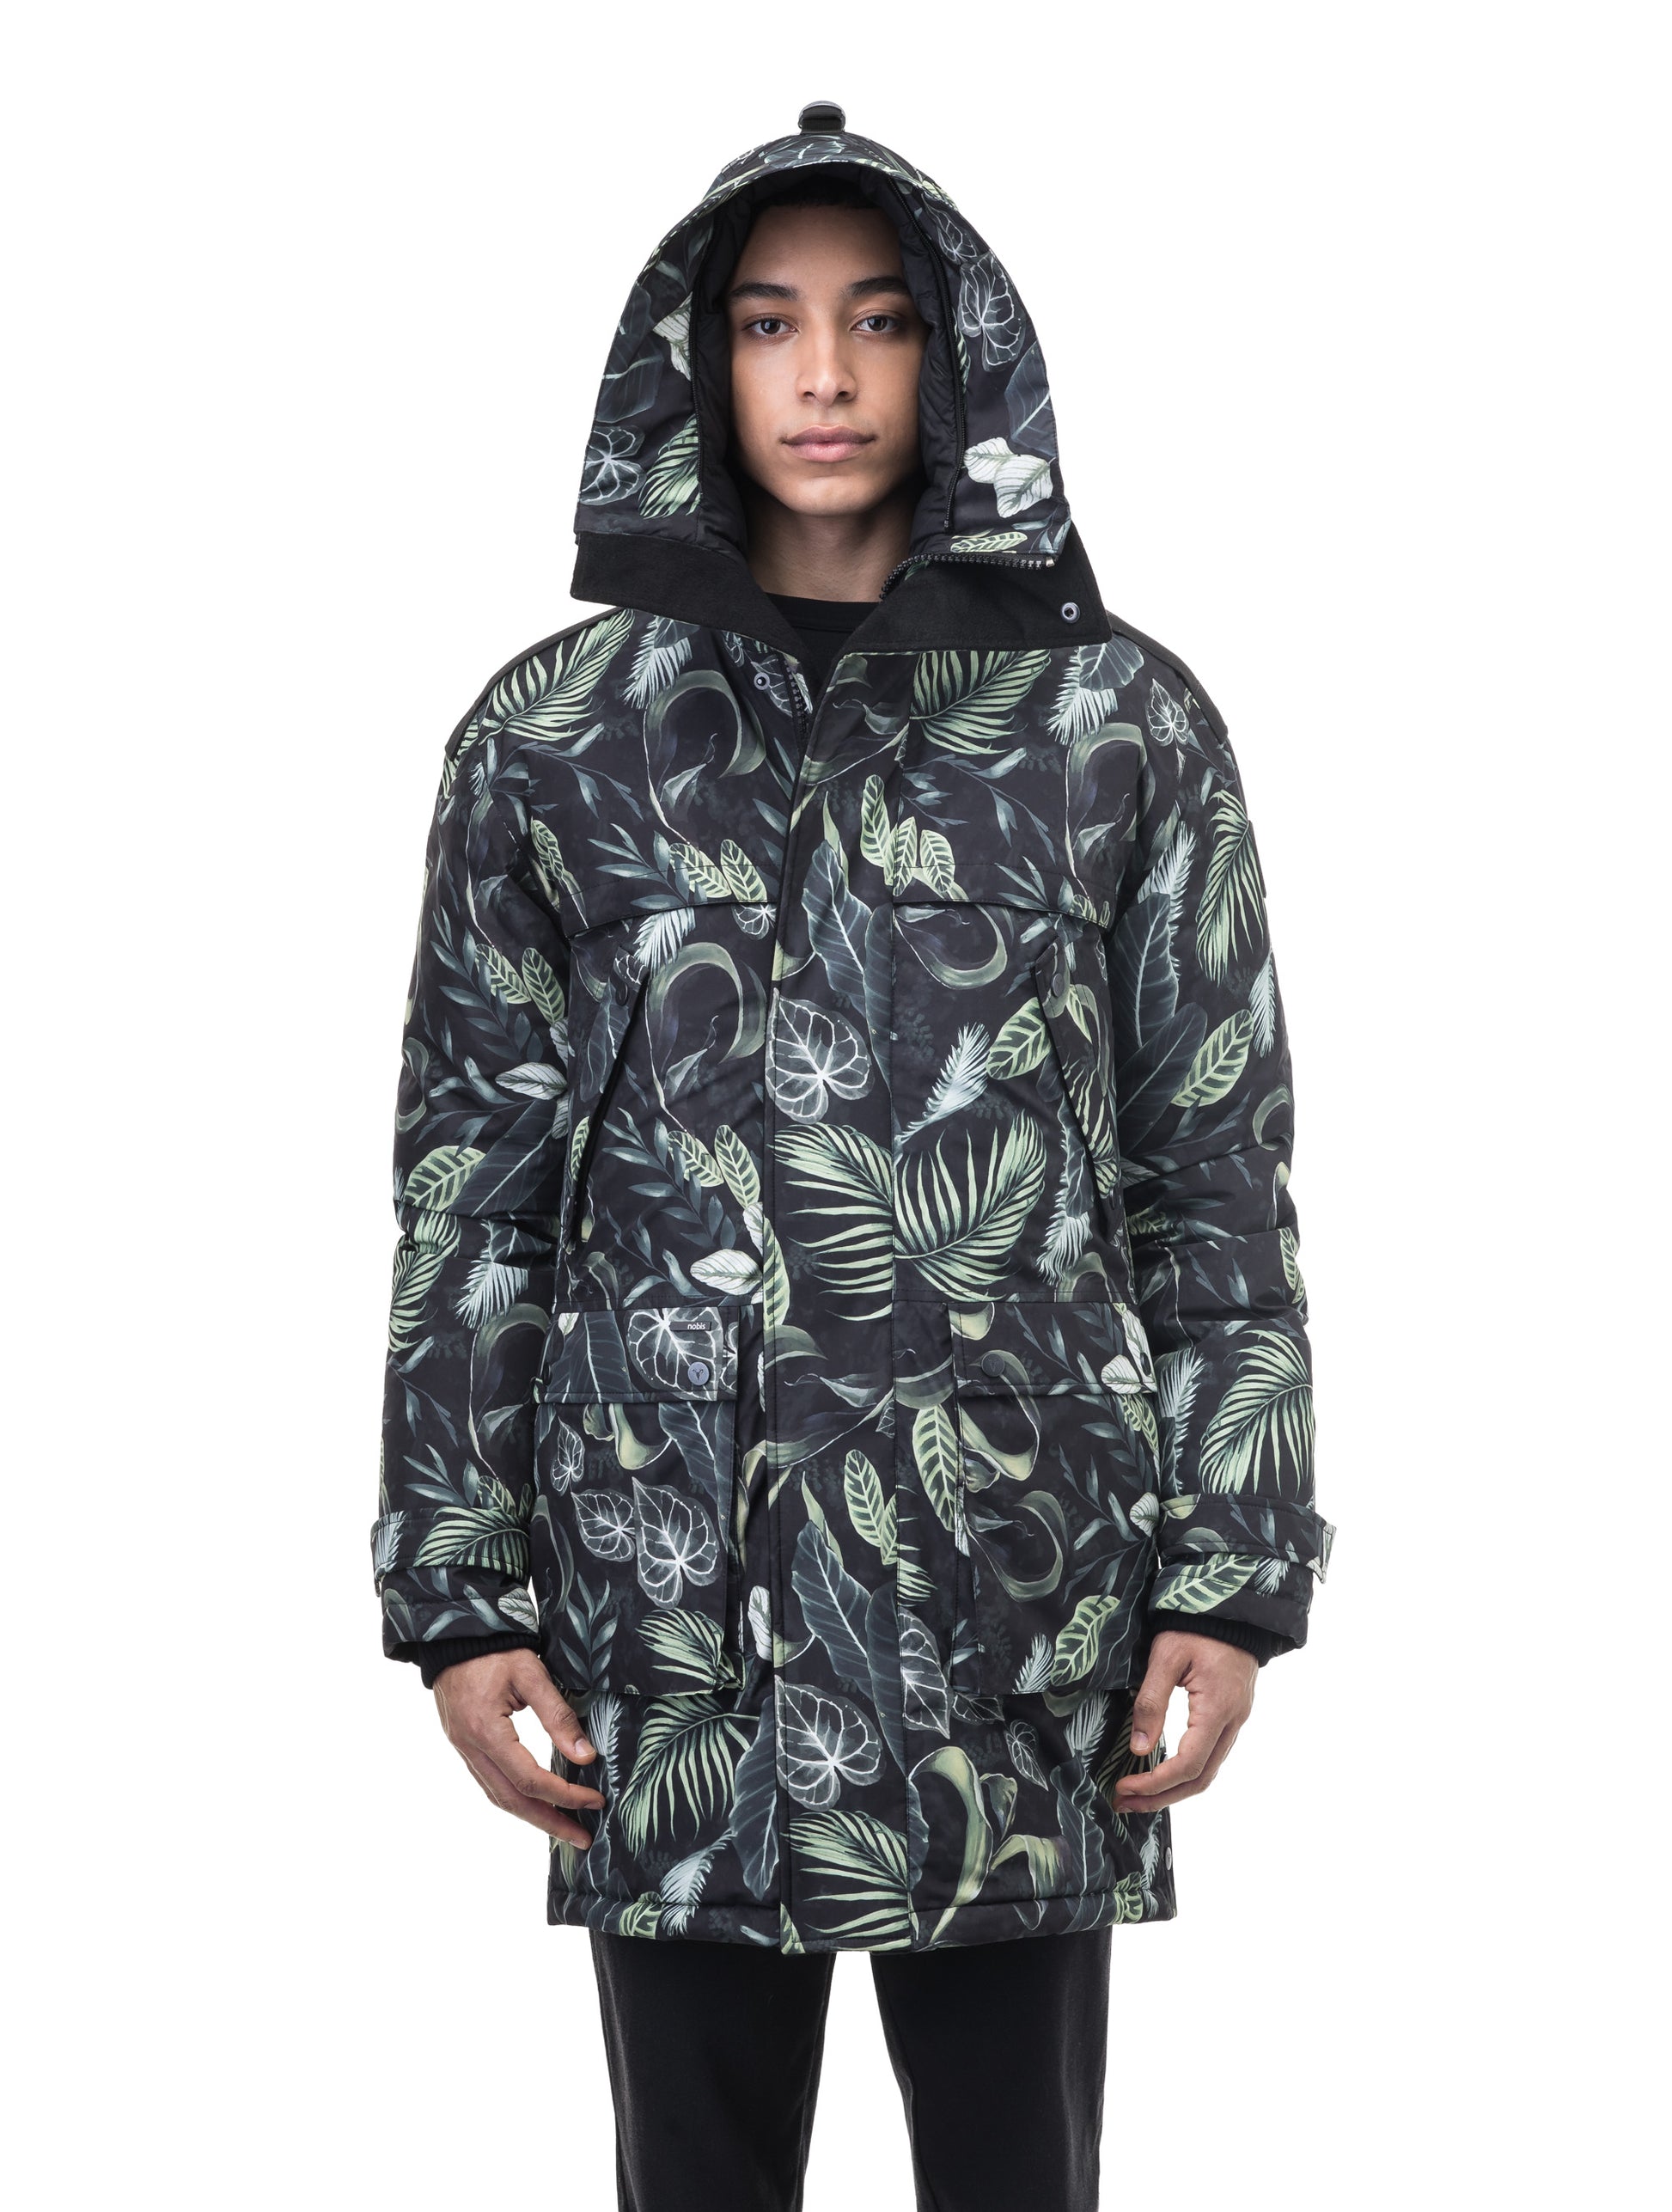 Men's Best Selling Parka the Yatesy is a down filled jacket with a zipper closure and magnetic placket in Foliage